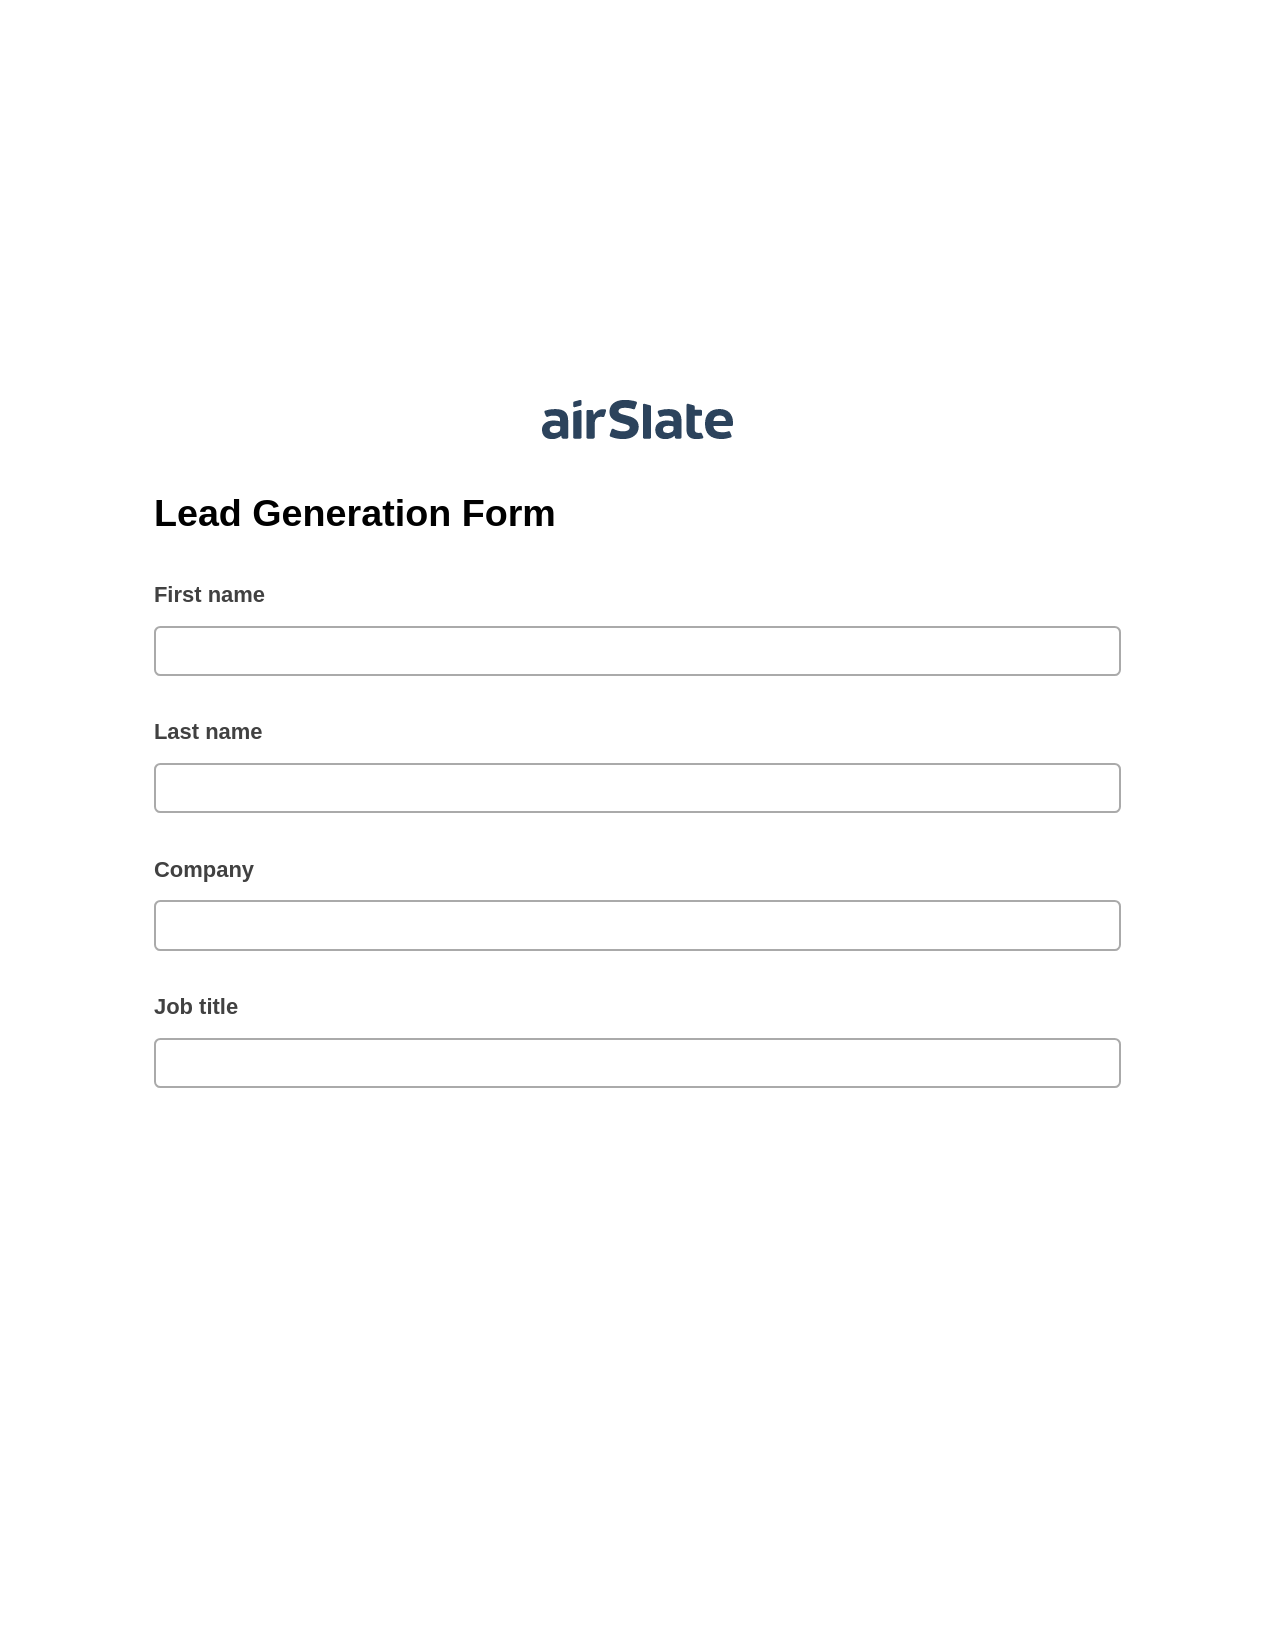 Multirole Lead Generation Form Pre-fill from another Slate Bot, Create slate addon, Export to WebMerge Bot